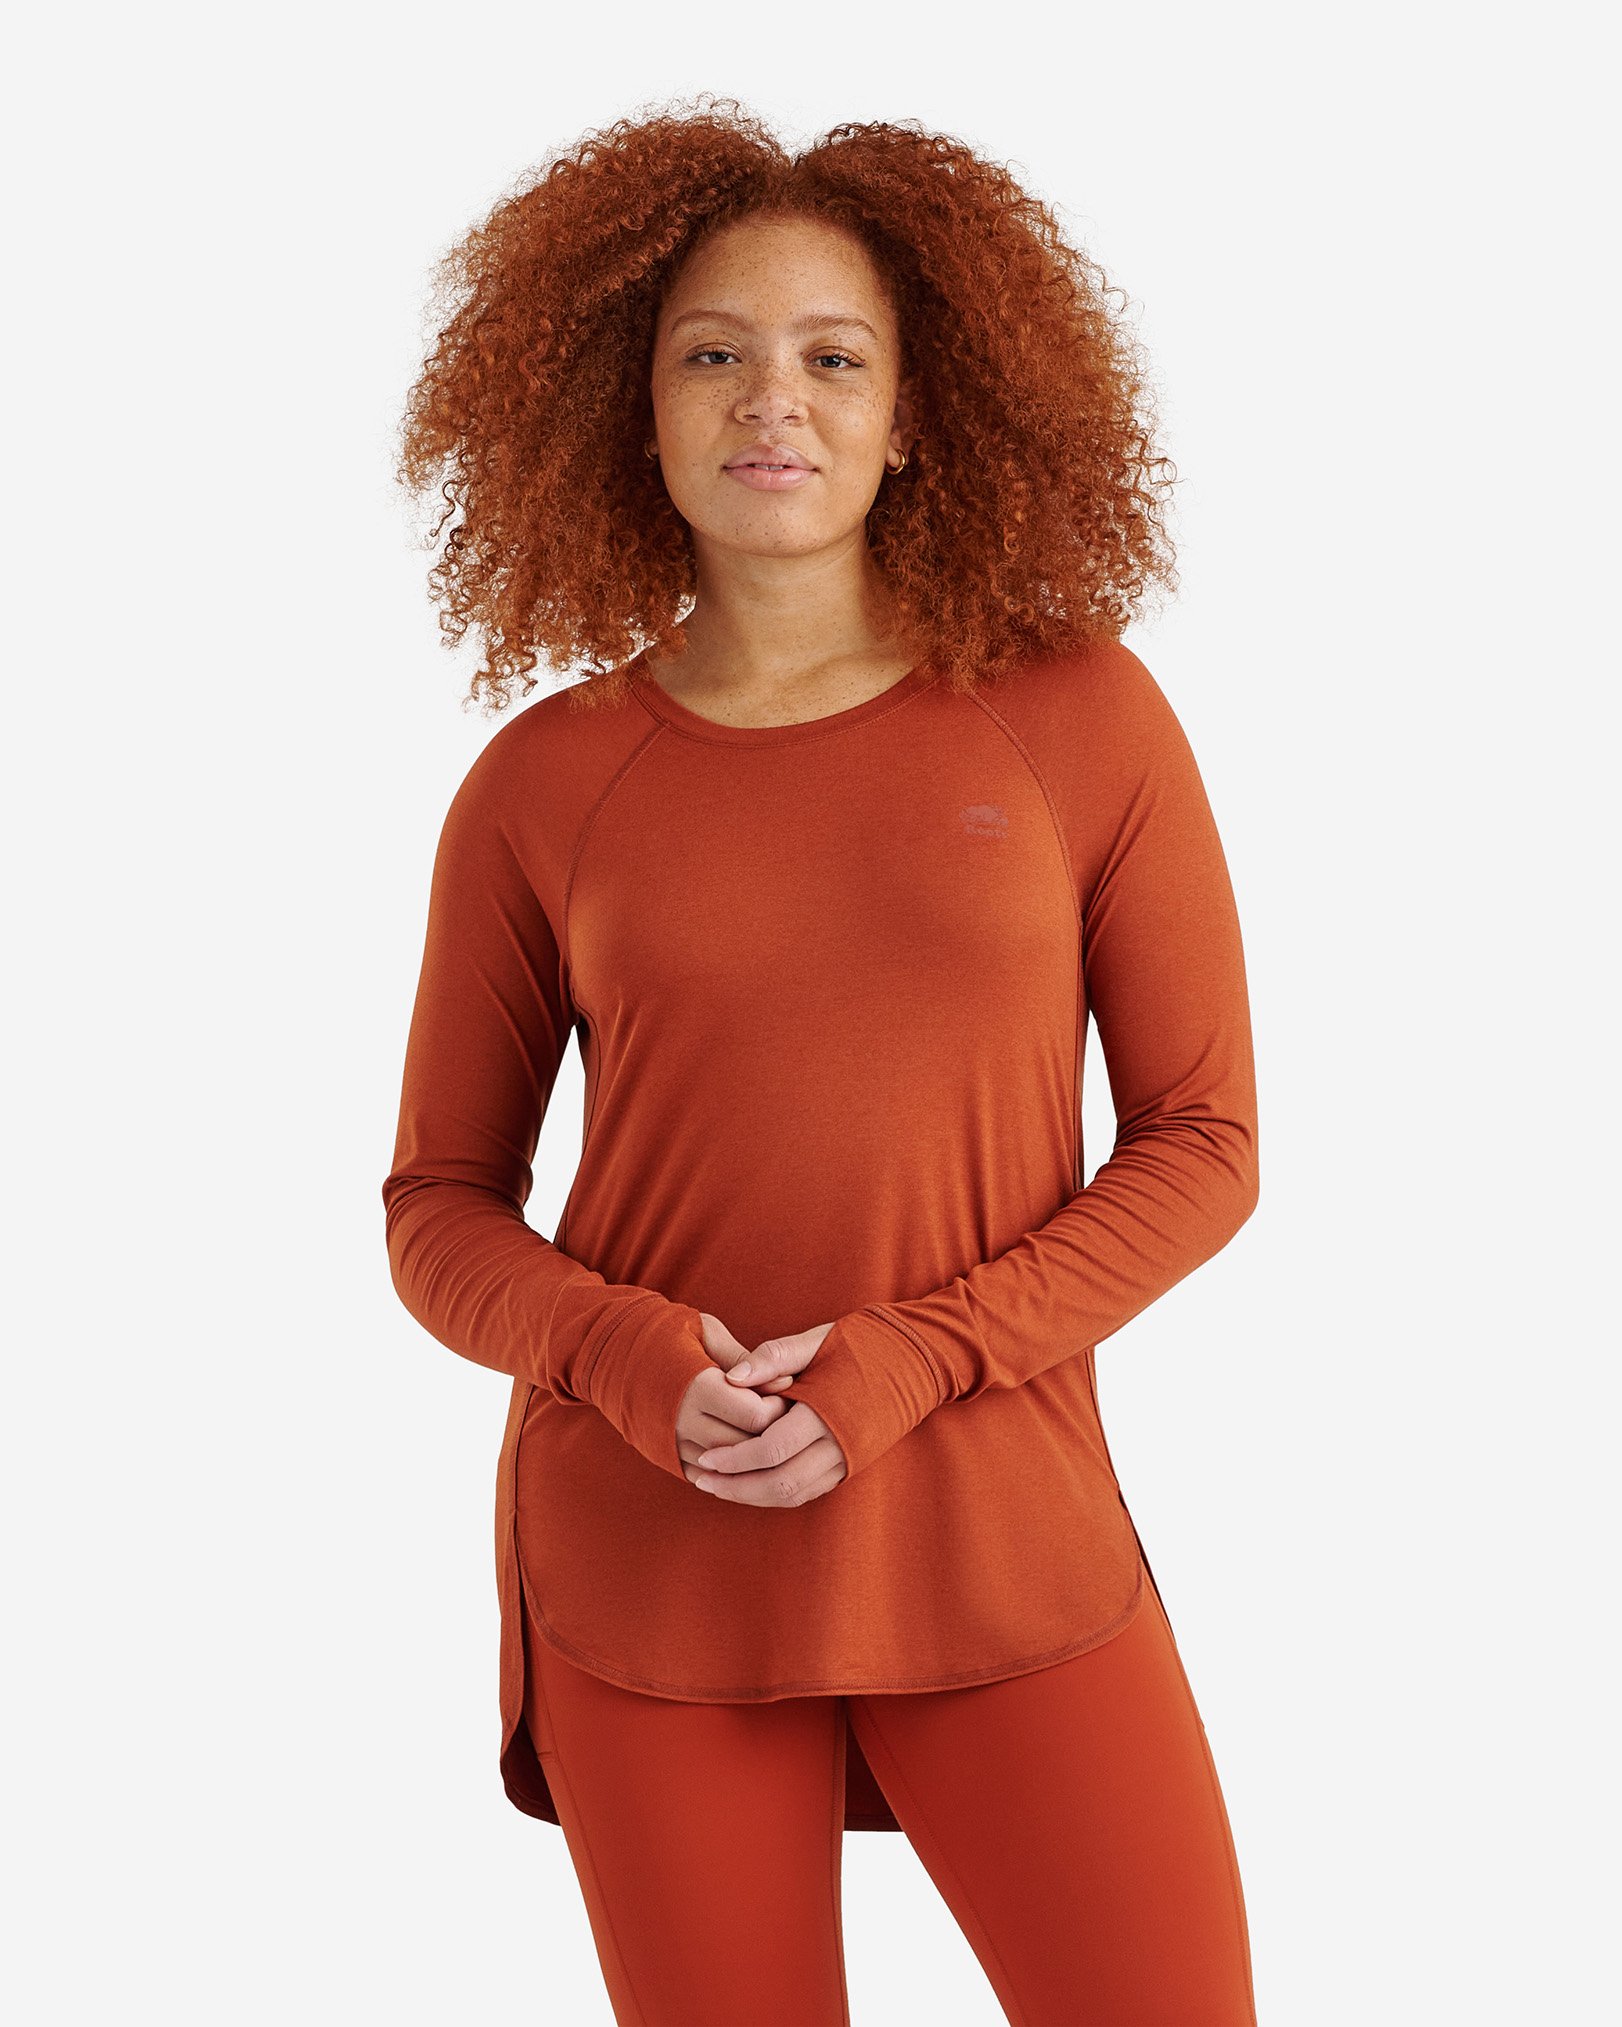 Roots Renew Long Sleeve Top in Paprika Orange Mix